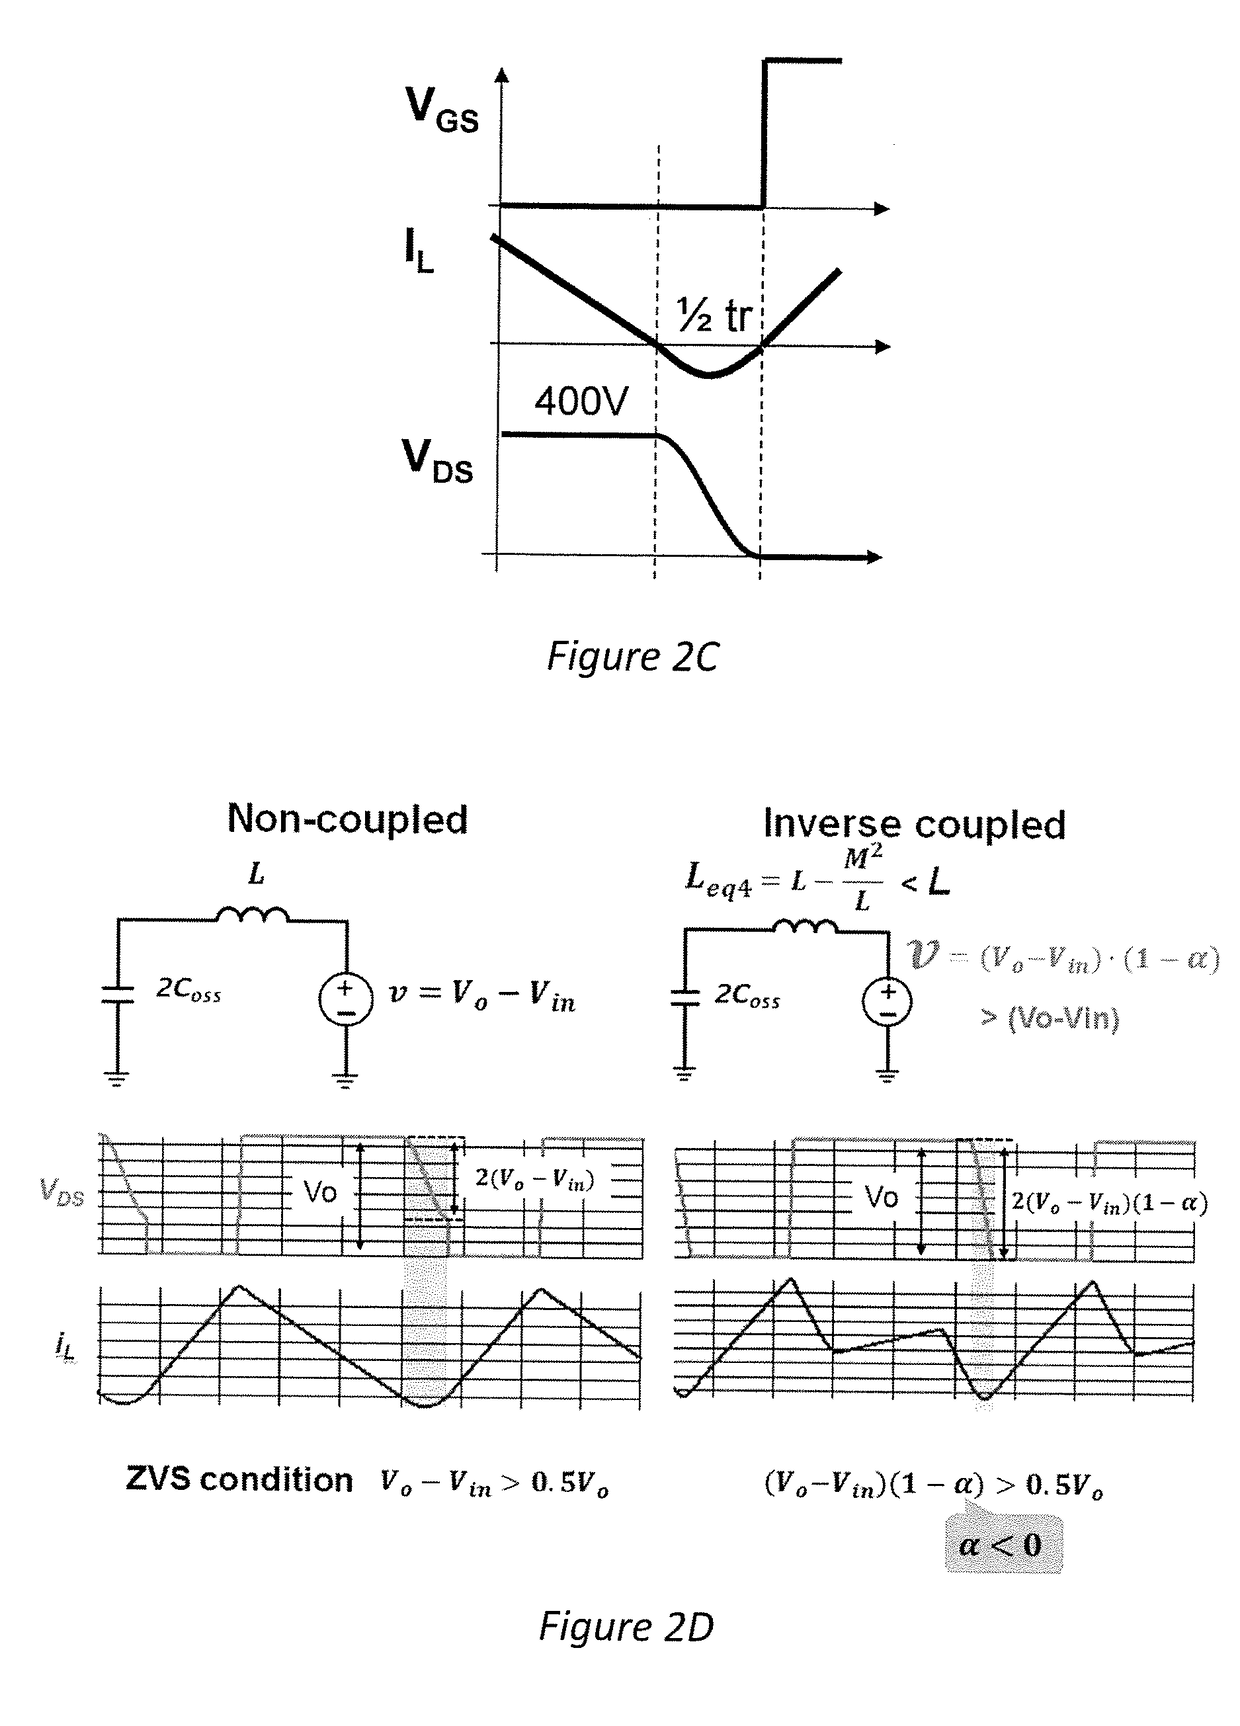 Multiphase coupled and integrated inductors with printed circuit board (PBC) windings for power factor correction (PFC) converters